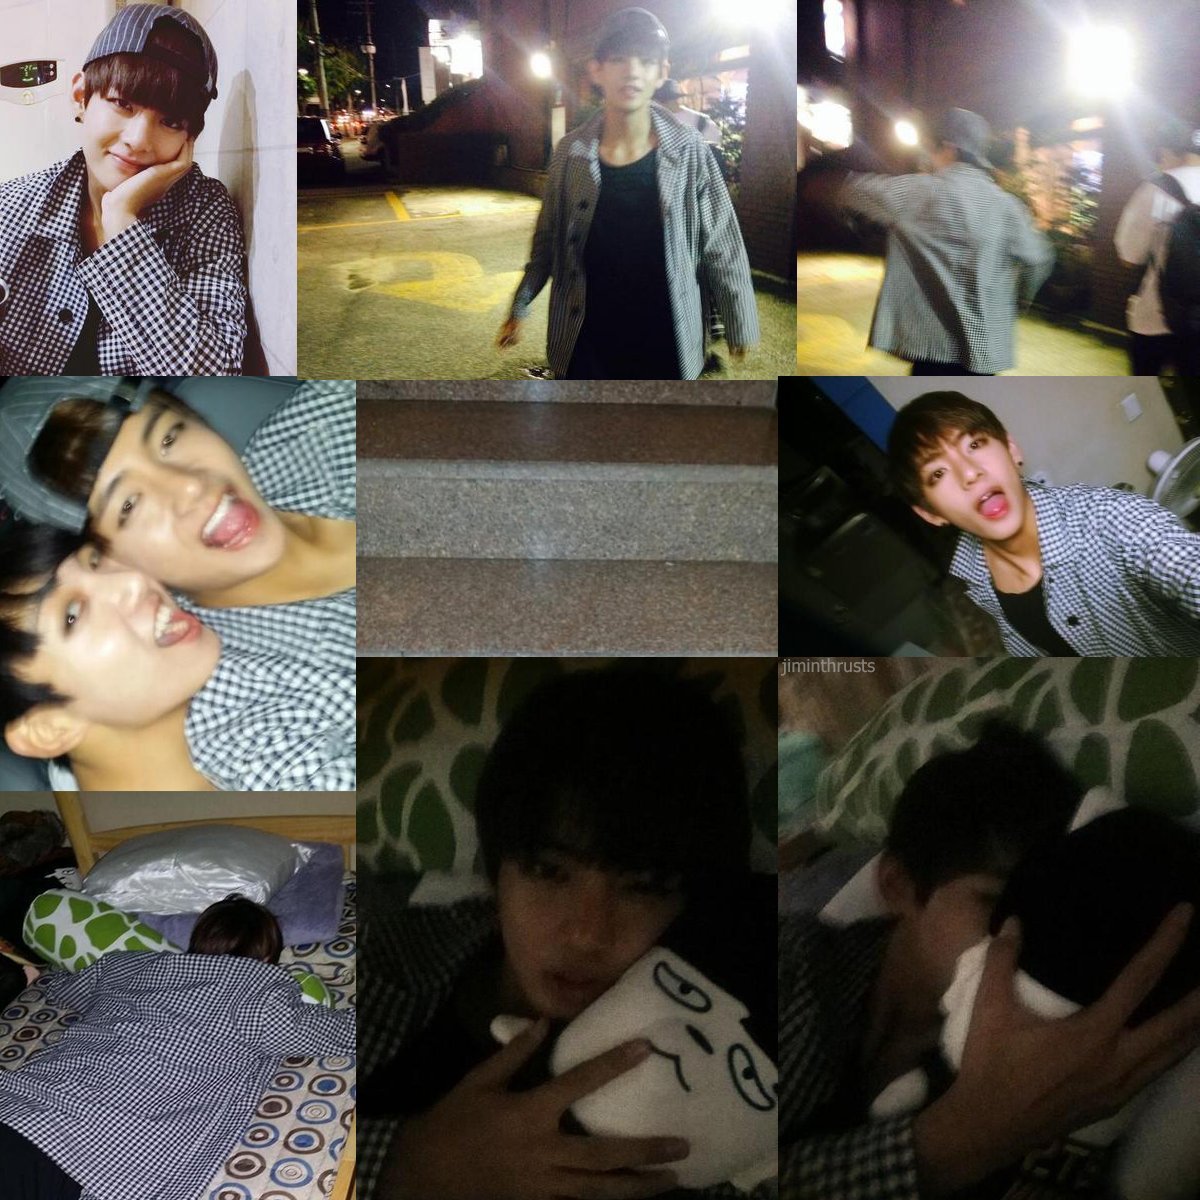 I CAN'T BELIEVE I FORGOT TO ADD TAEKOOK DRUNK IN 2014. Never forget when Taehyung got drunk for the first time and ended up posting a lot of pictures on twitter, including a selca with Jungkook.